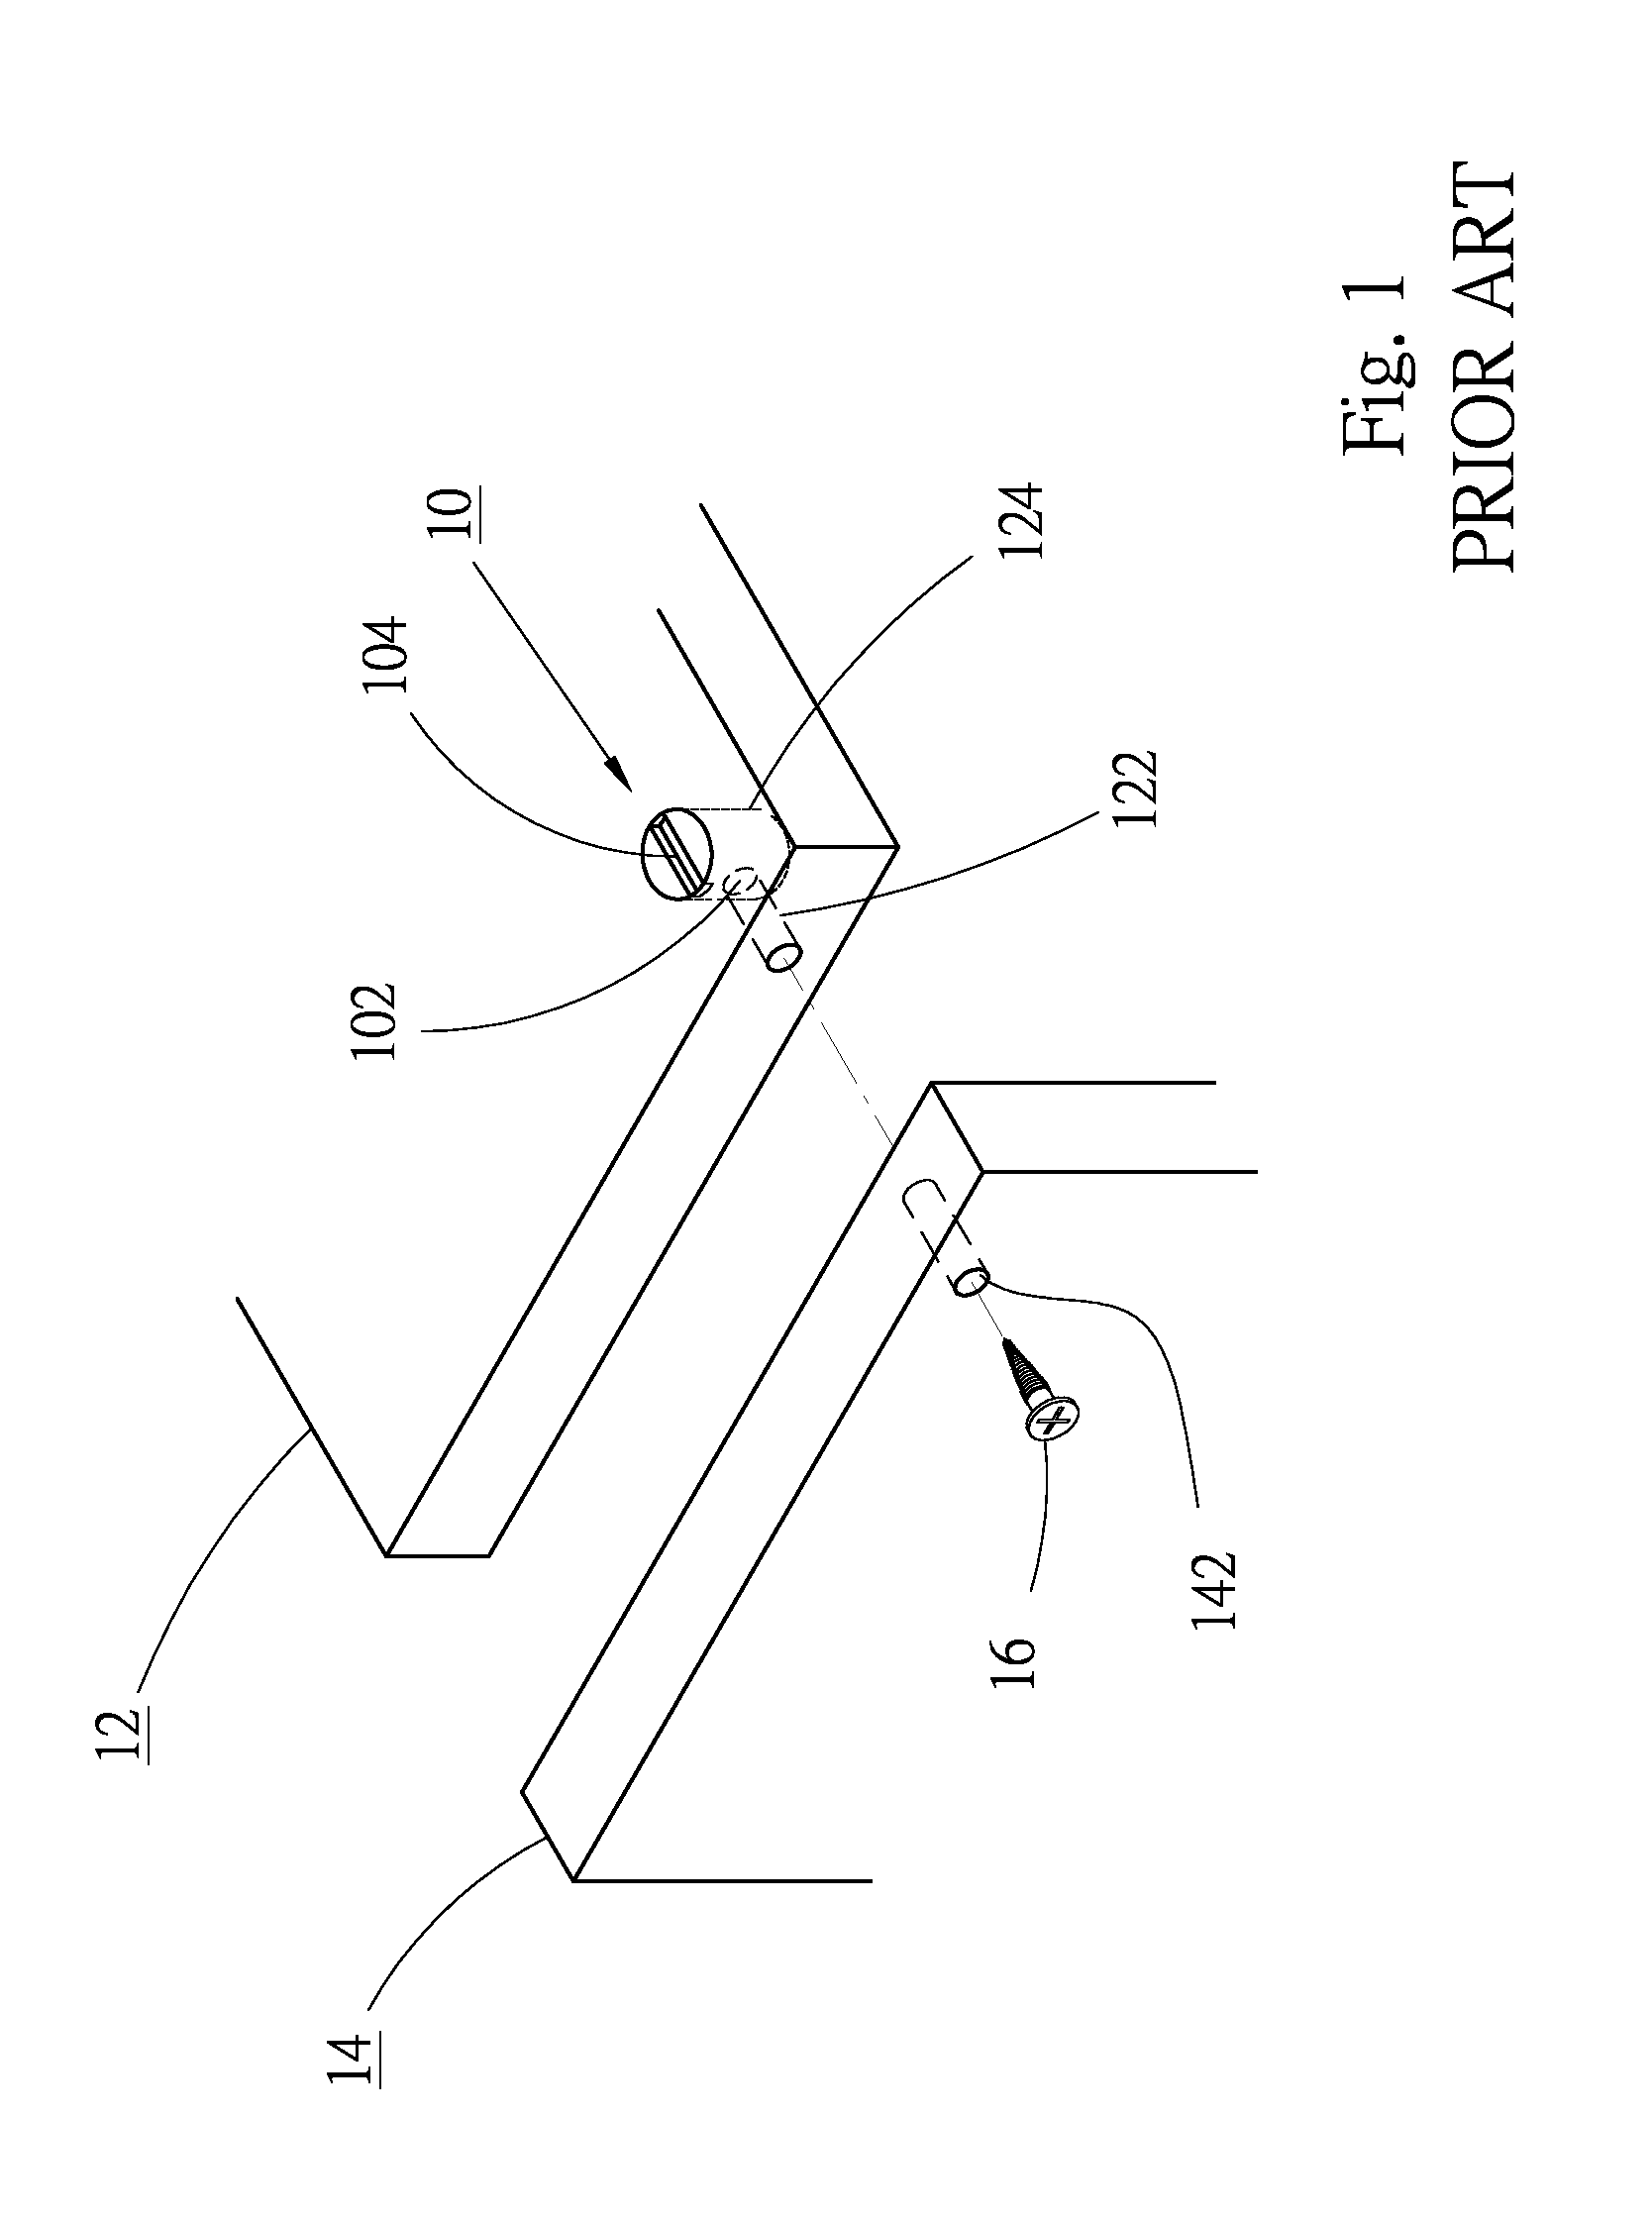 Serial-connection fitting assembly and punch appratus applied therefore